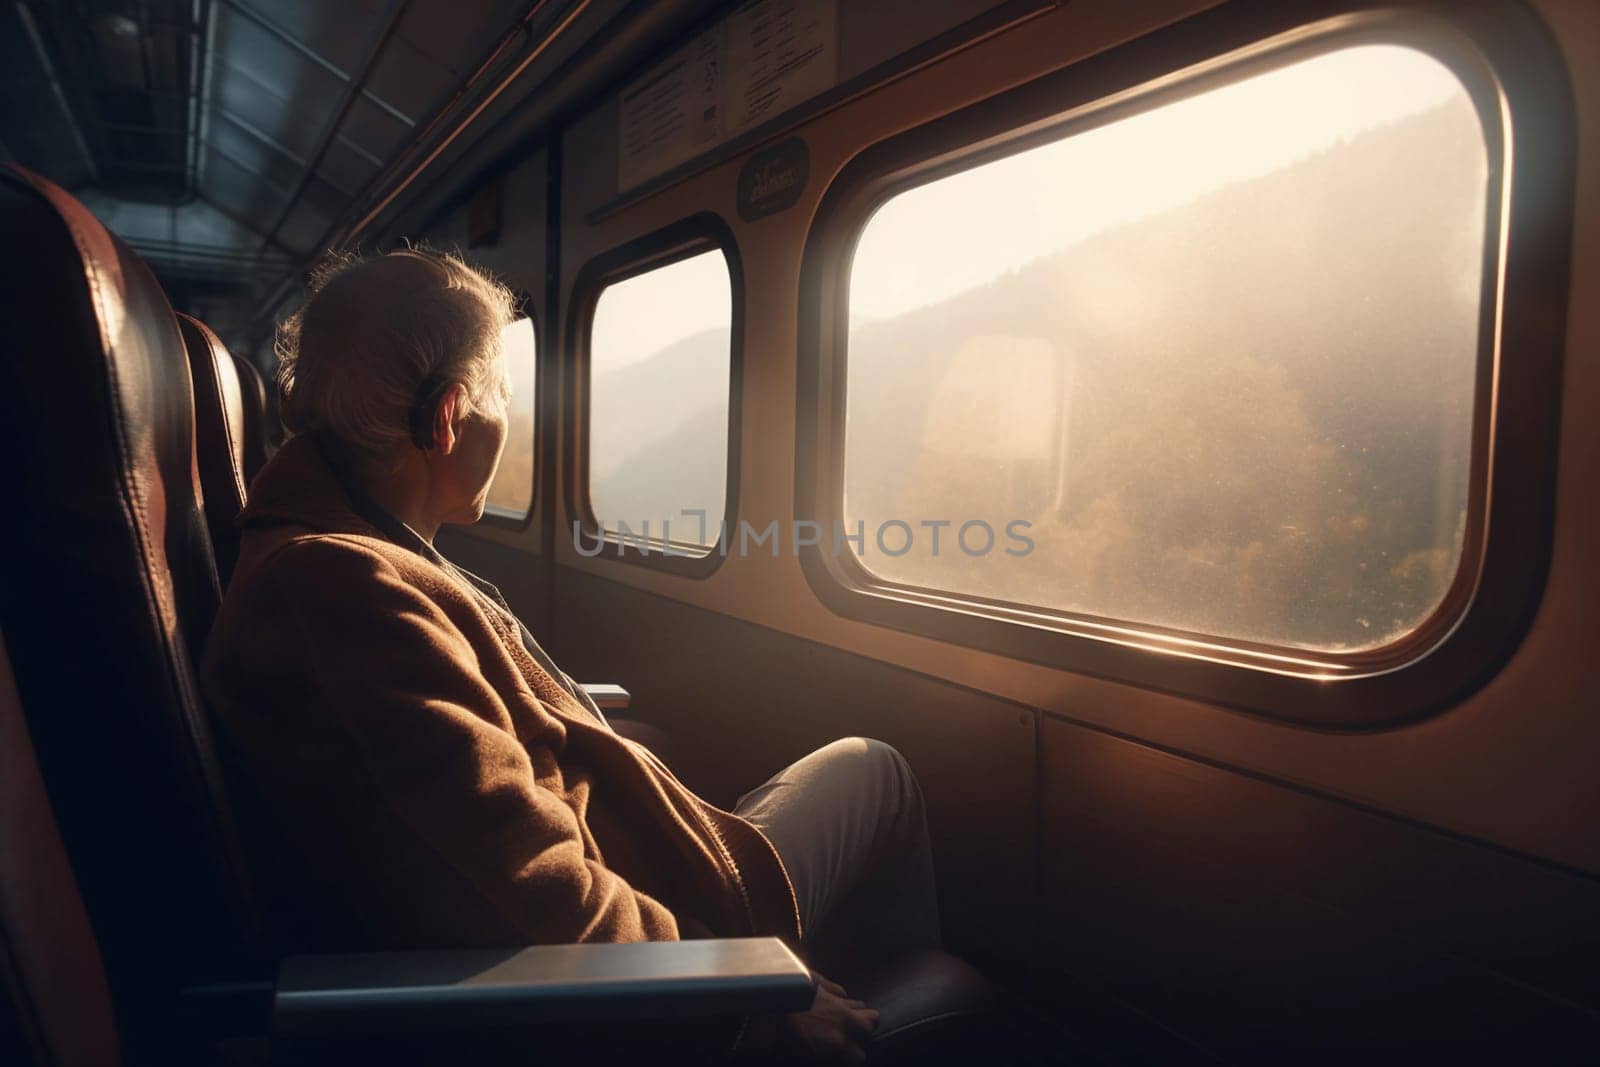 A man sits in a train looking out the window of a train.